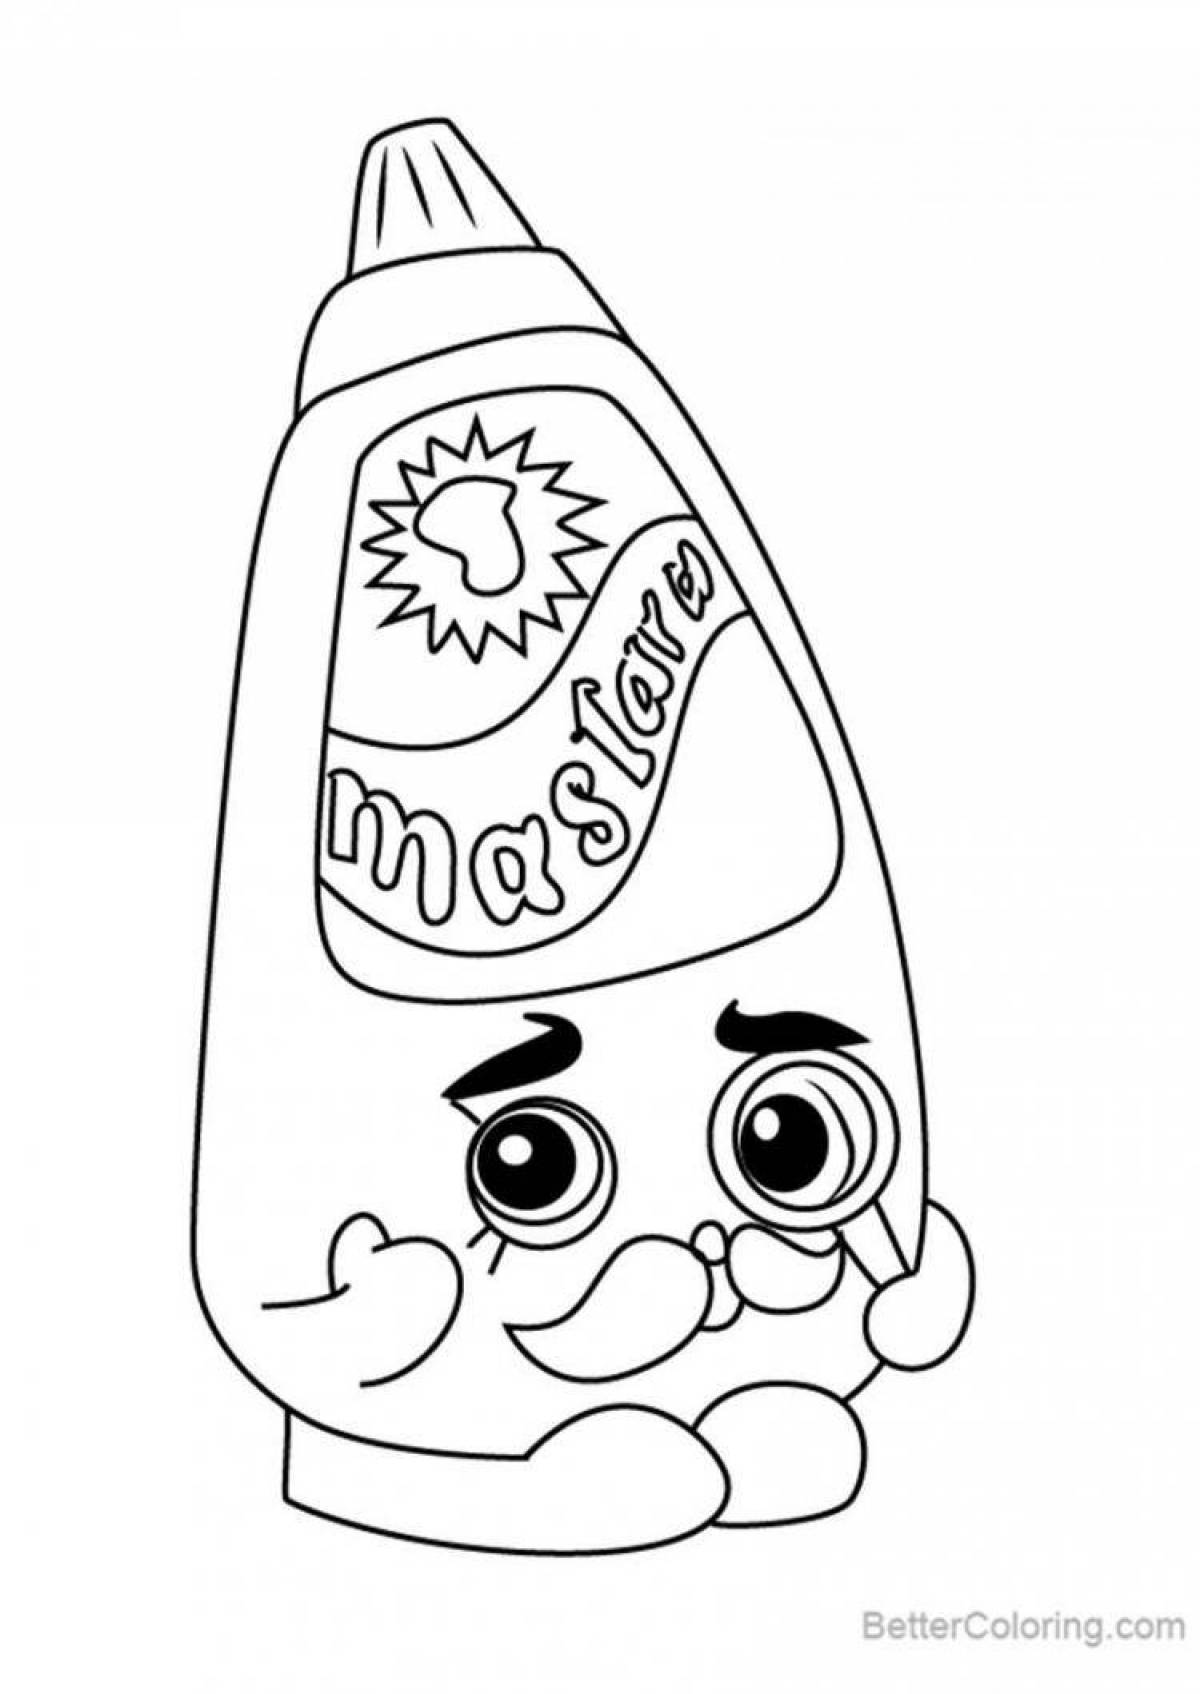 Outstanding 3 marker challenge coloring page